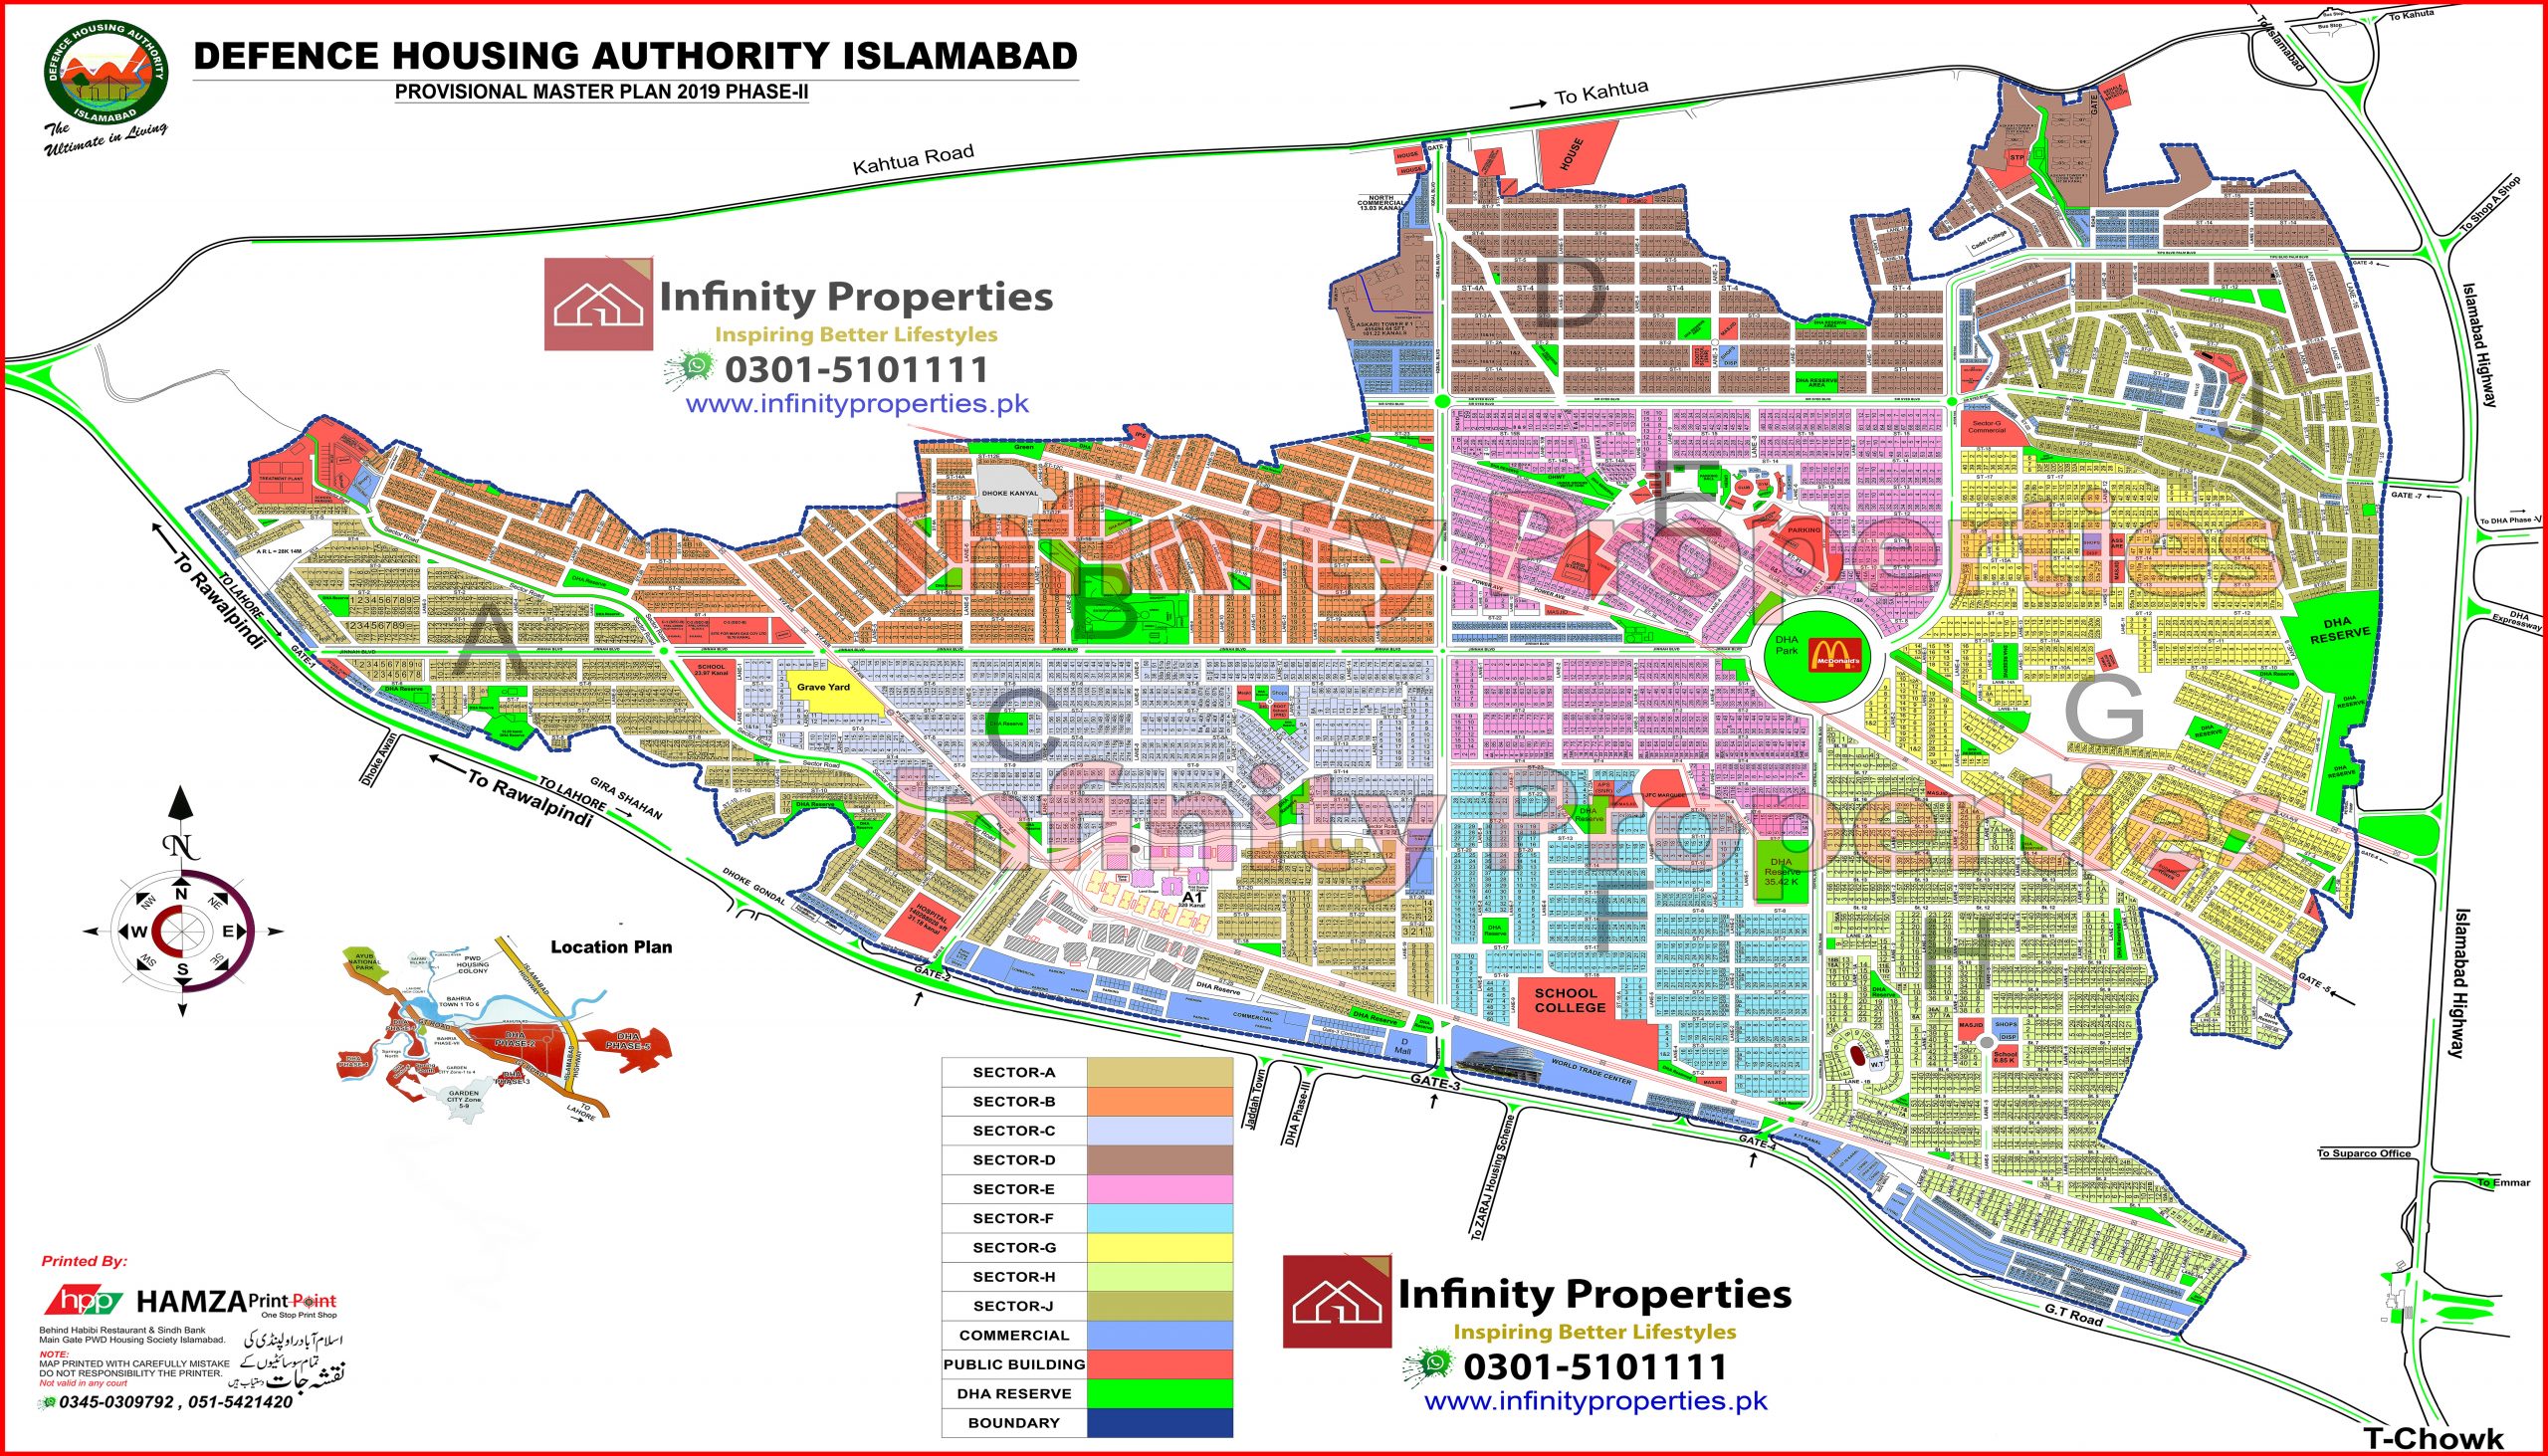 DHA 2 Infinity Properties Map 1 Scaled 